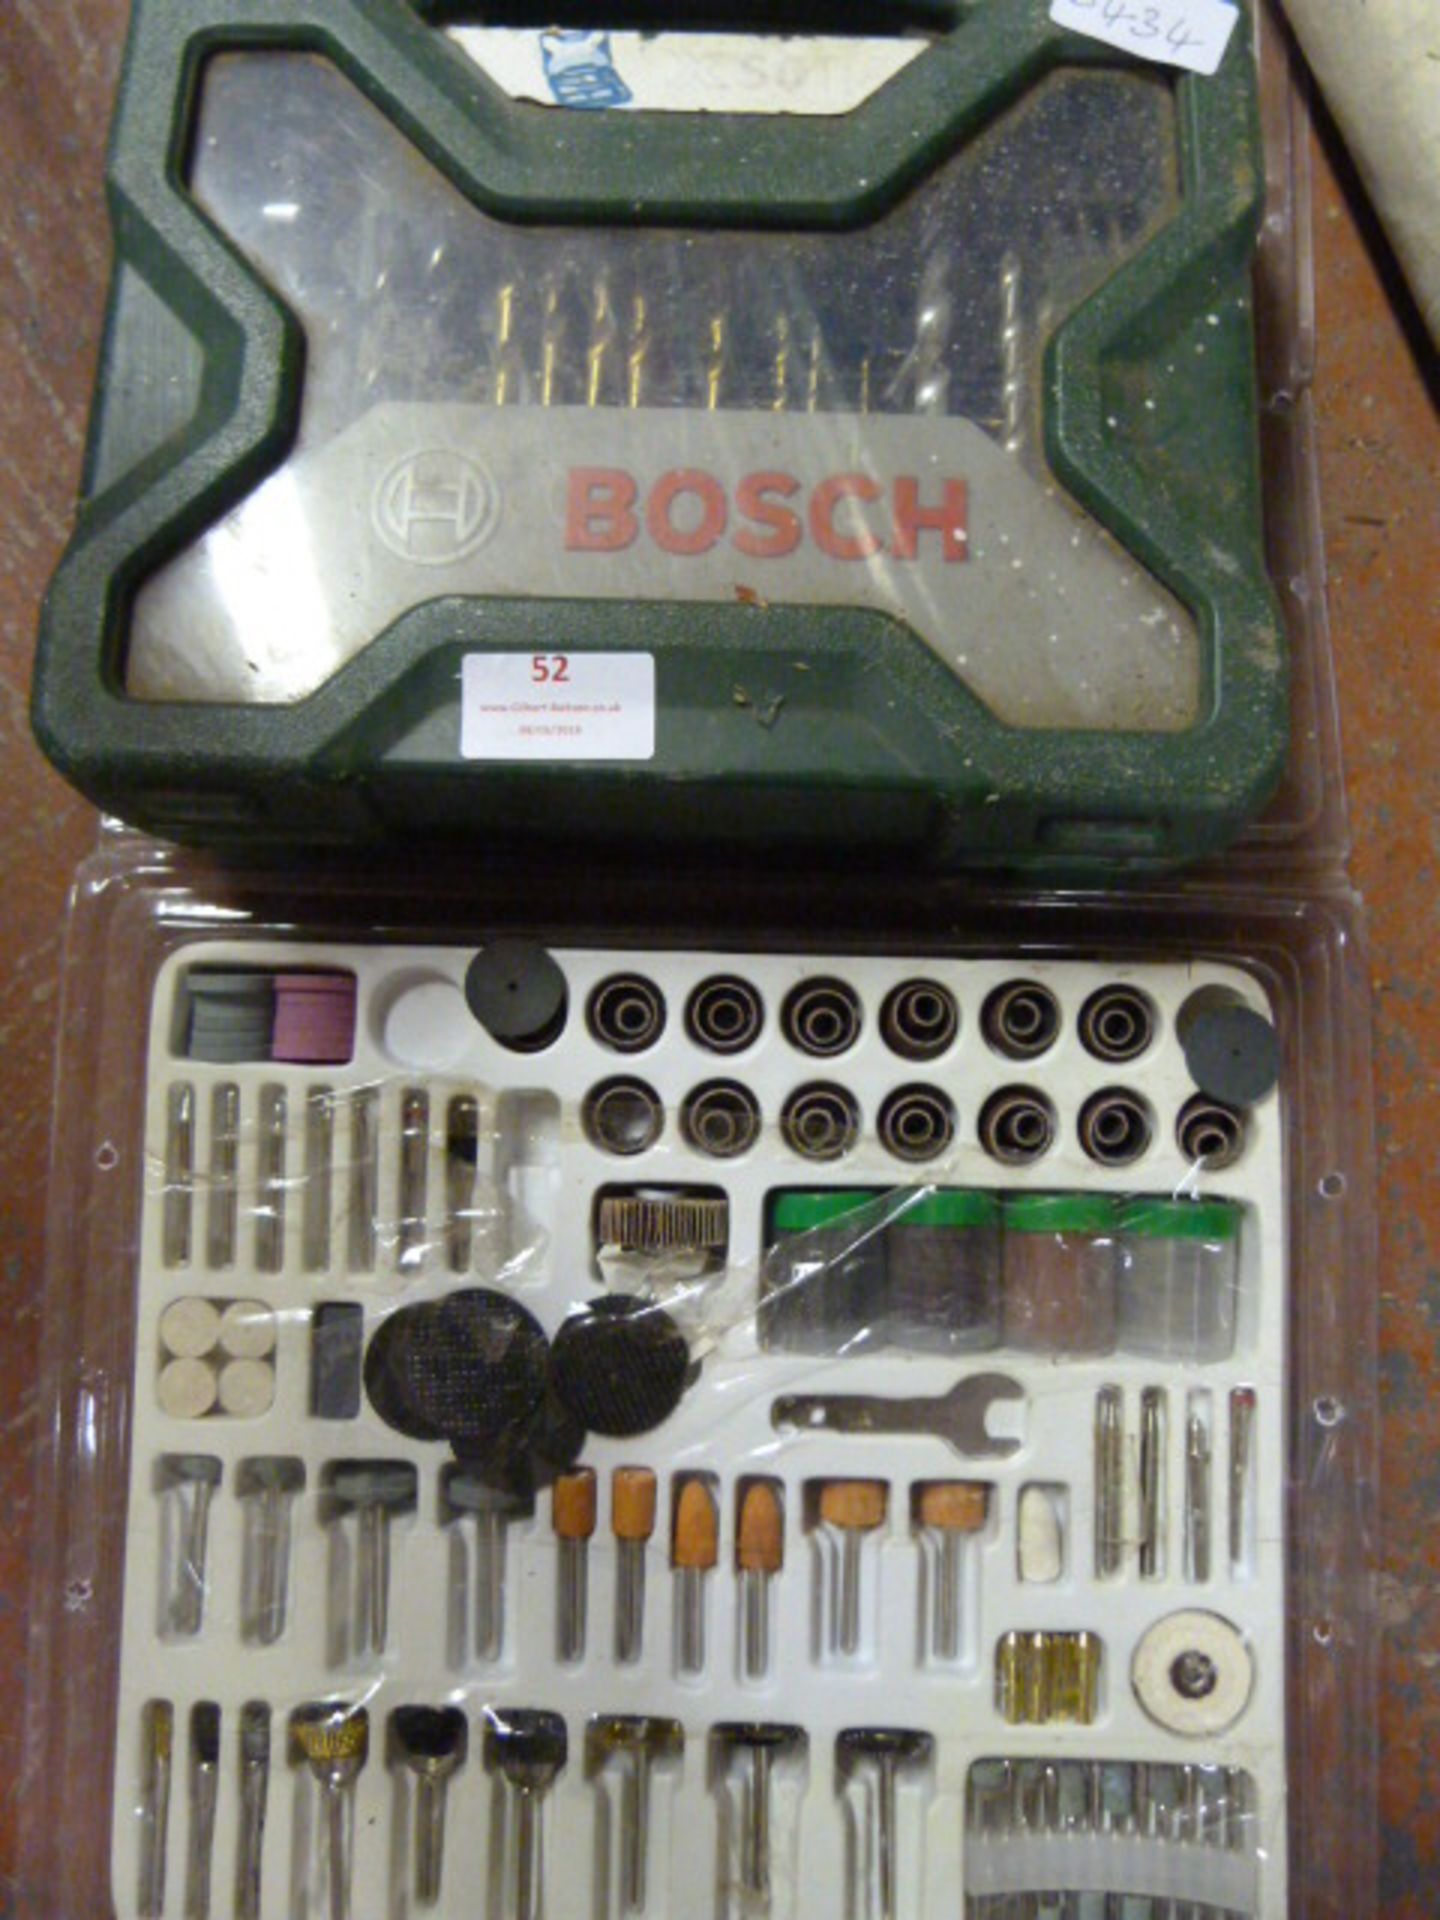 Box of Bosch Drill Bits and a Box of Grinding Cone